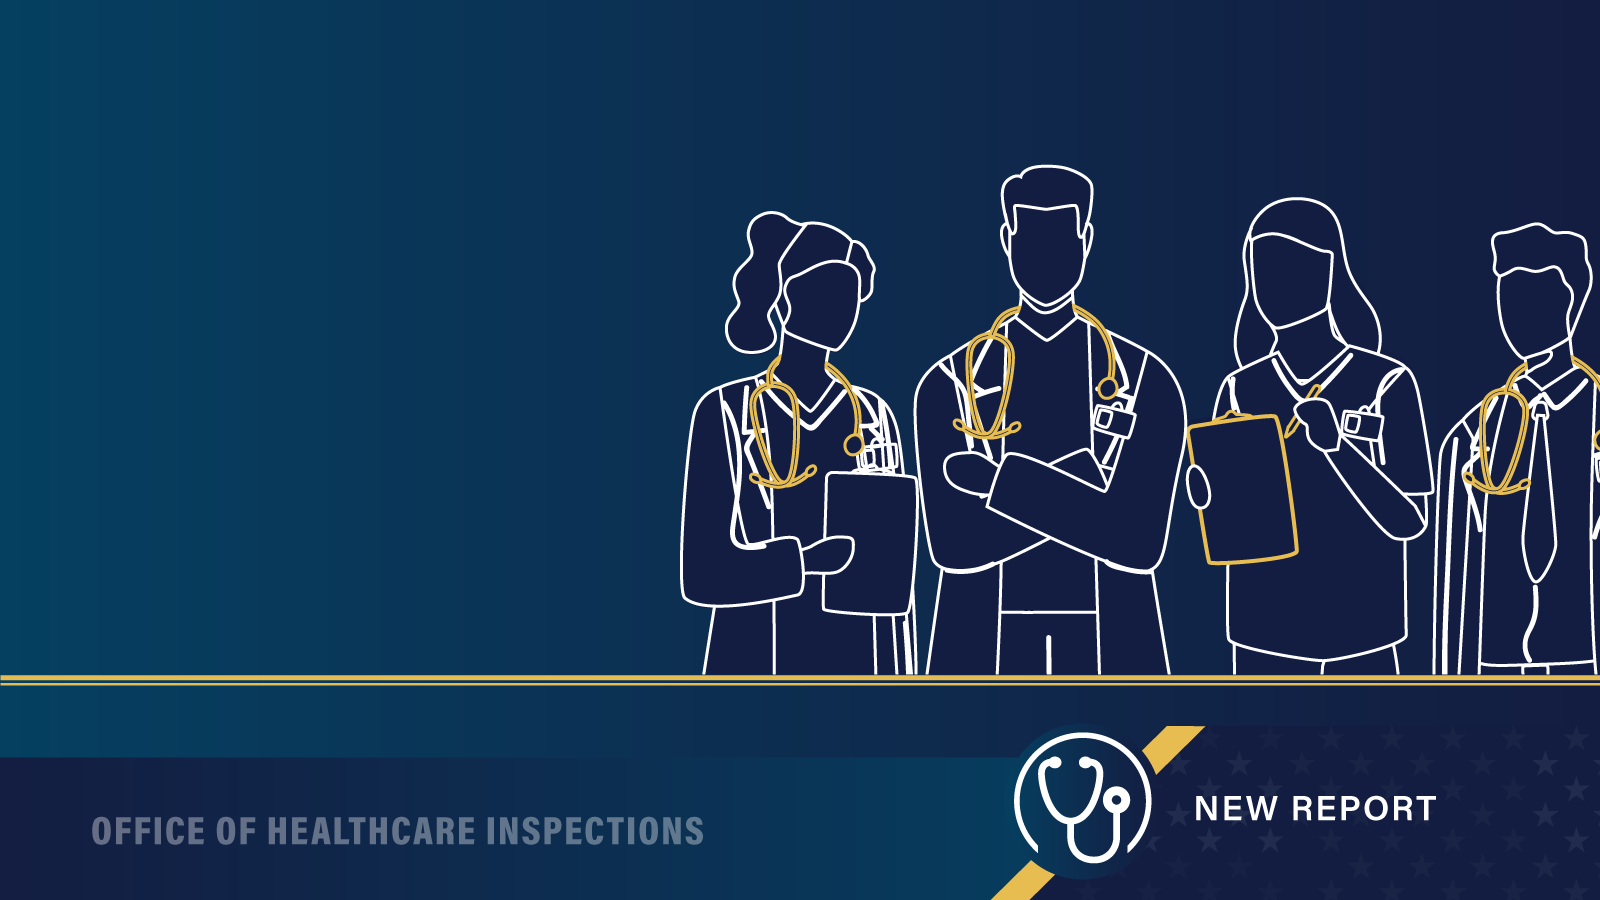 Office of Healthcare Inspections Artwork